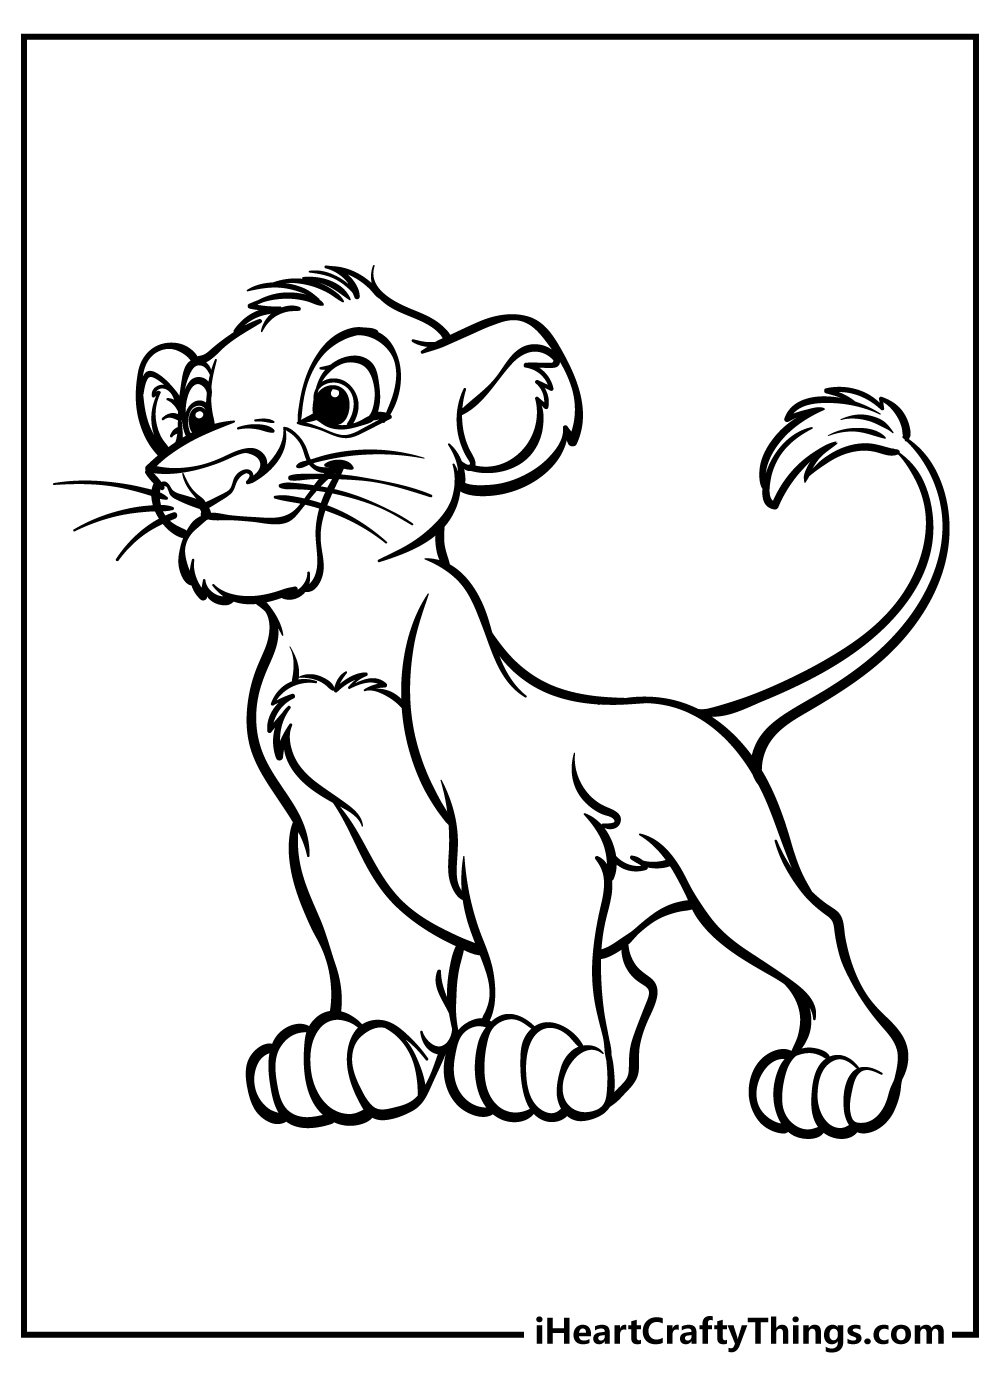 Lion King Coloring Pages free pdf download